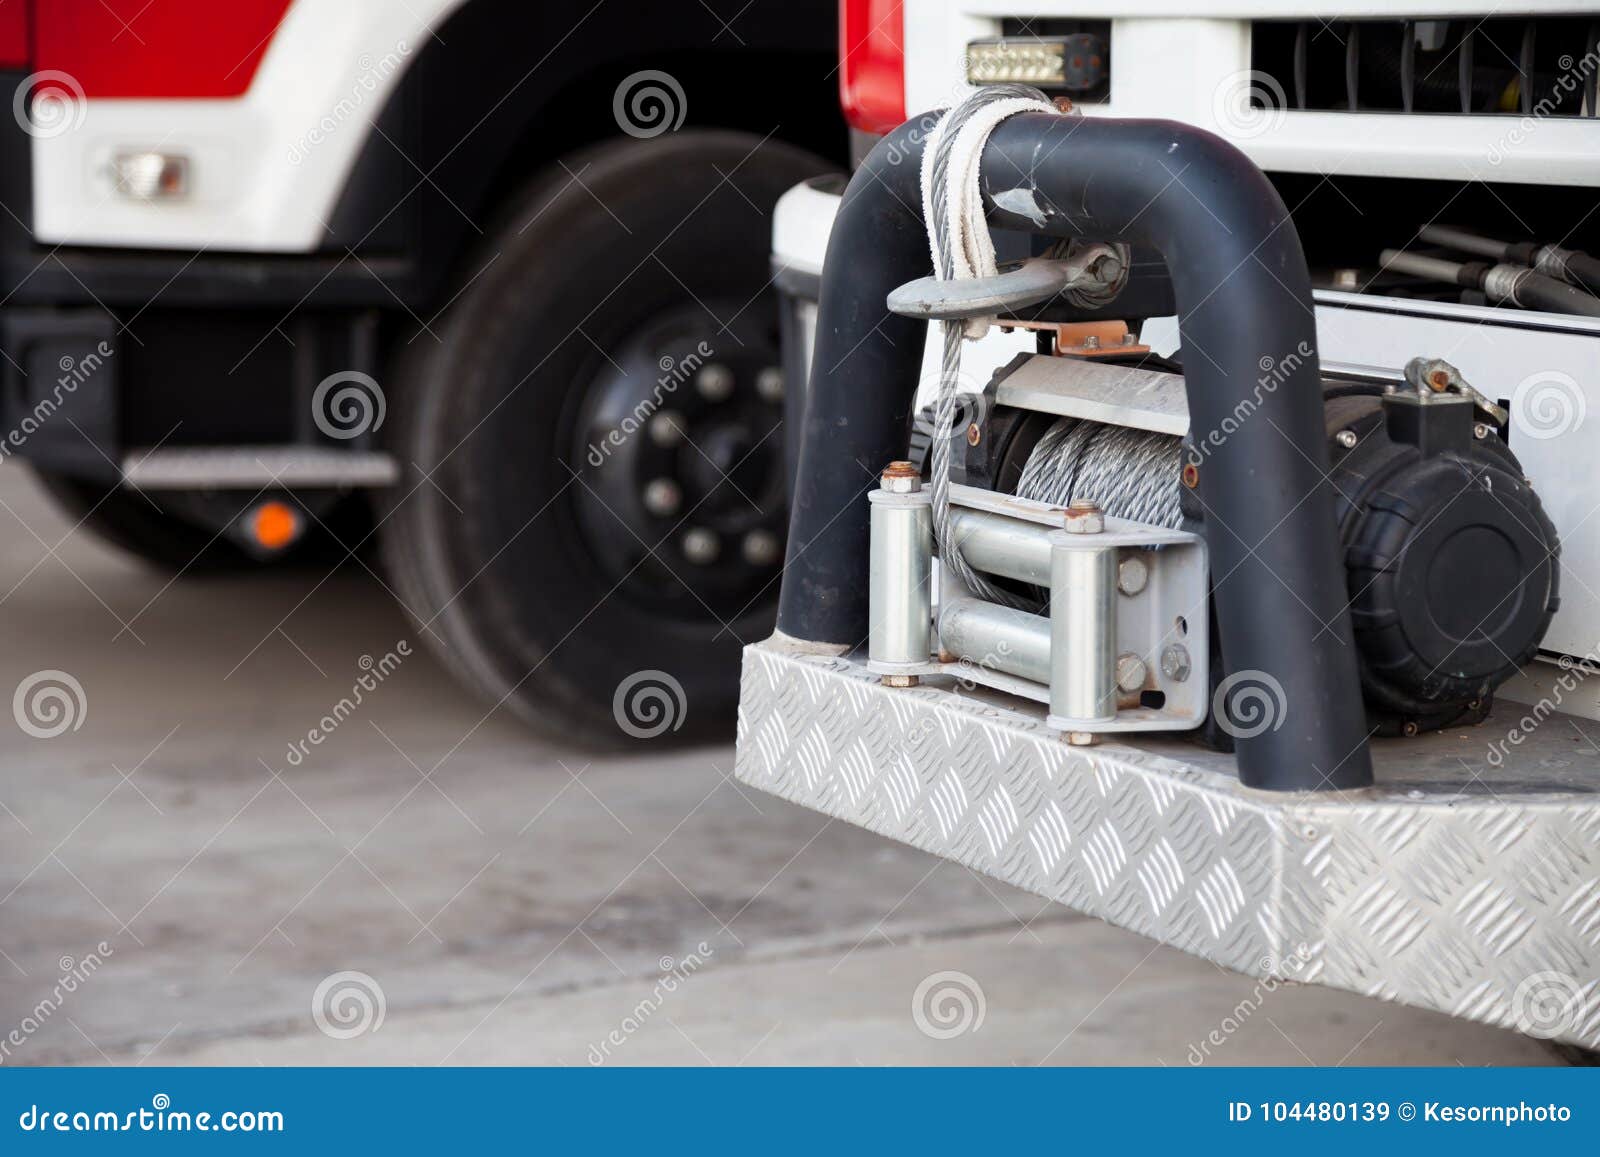 Tow Hook from a Large Fire Engine. is an Emergency Towing Tool To Help  Stock Image - Image of industrial, closeup: 104480139